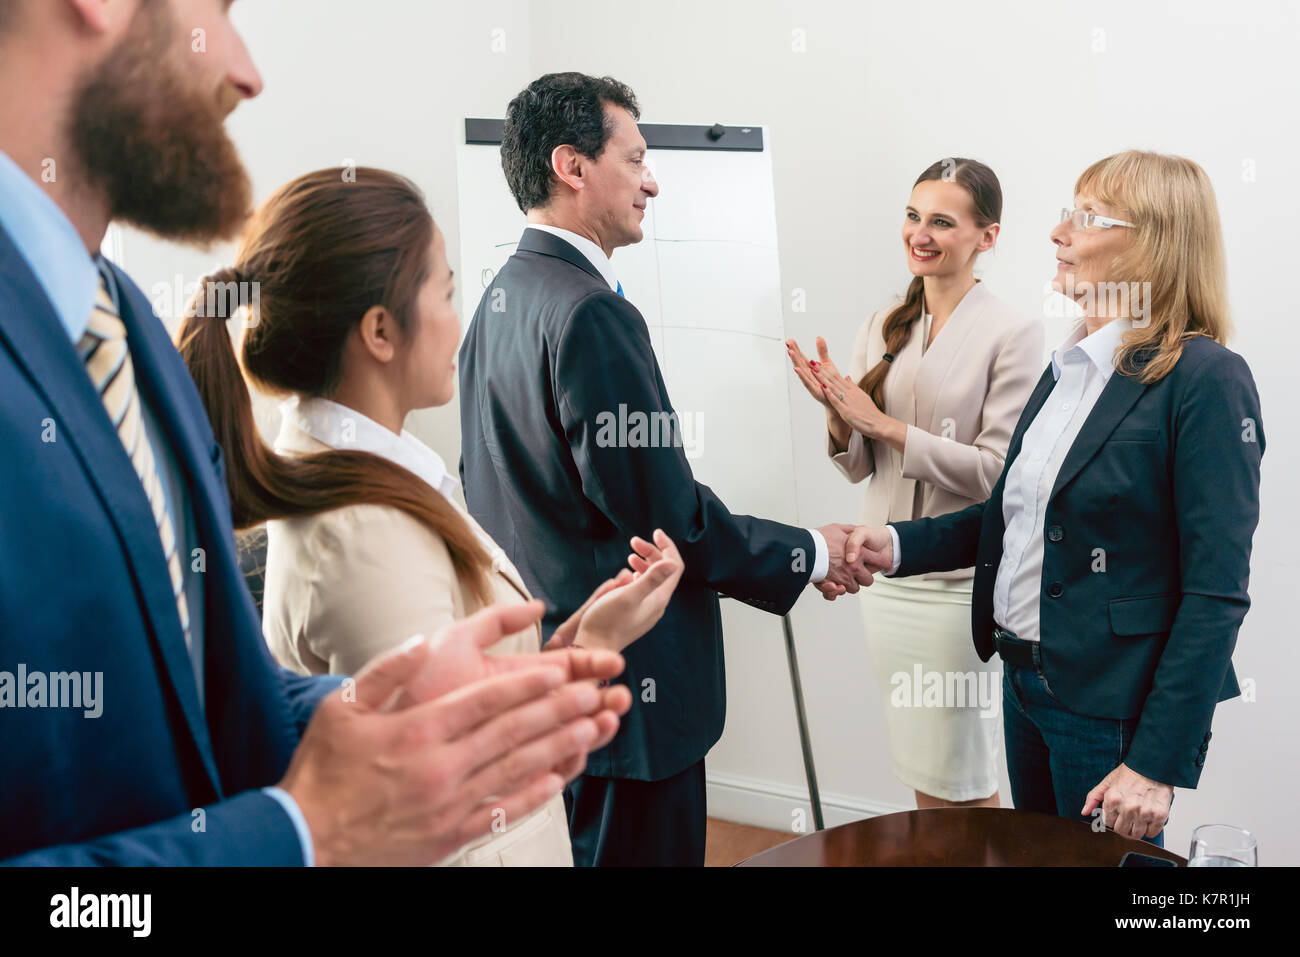 Two middle-aged business associates smiling while shaking hands  Stock Photo